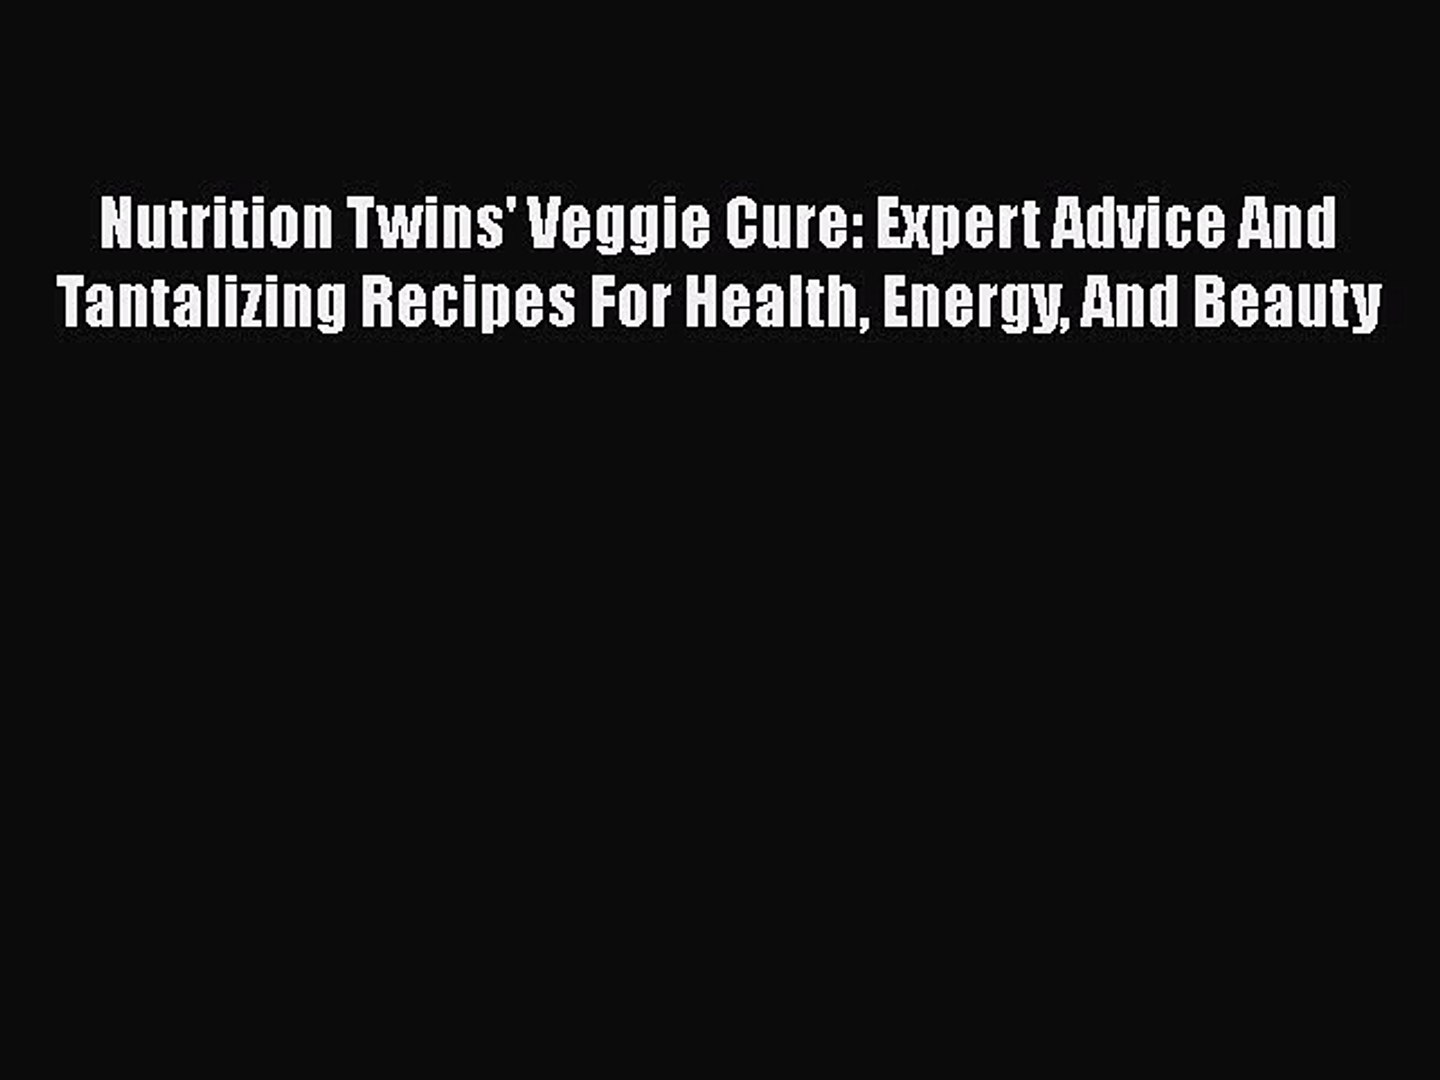 Nutrition Twins' Veggie Cure: Expert Advice And Tantalizing Recipes For Health Energy And Beaut